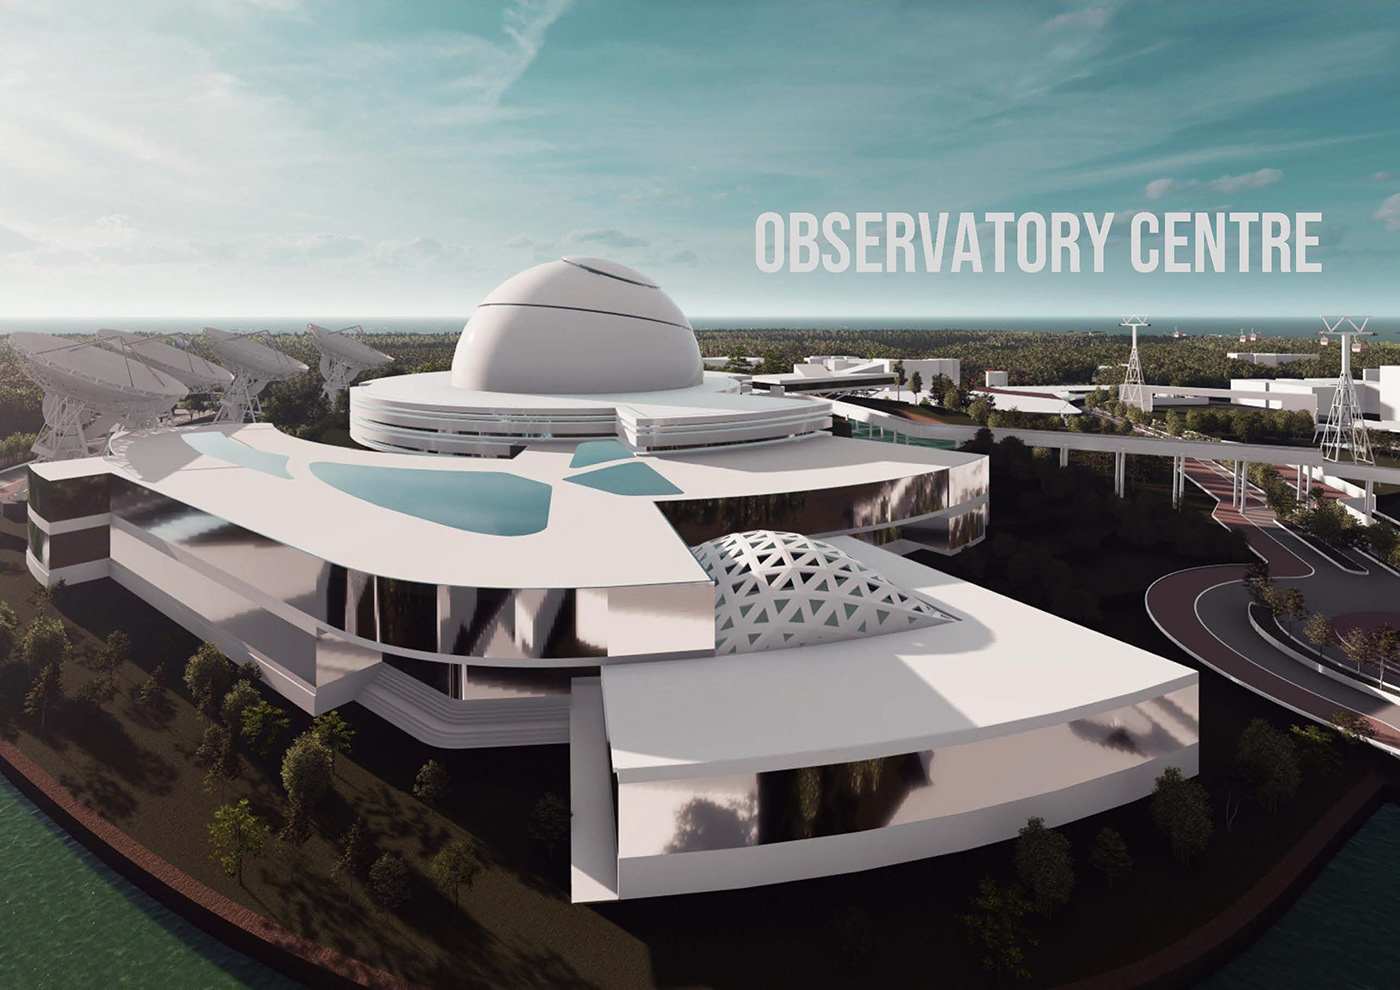 architecture astronomy ISRO nasa observatory observatory center planet planetarium Space  Space design